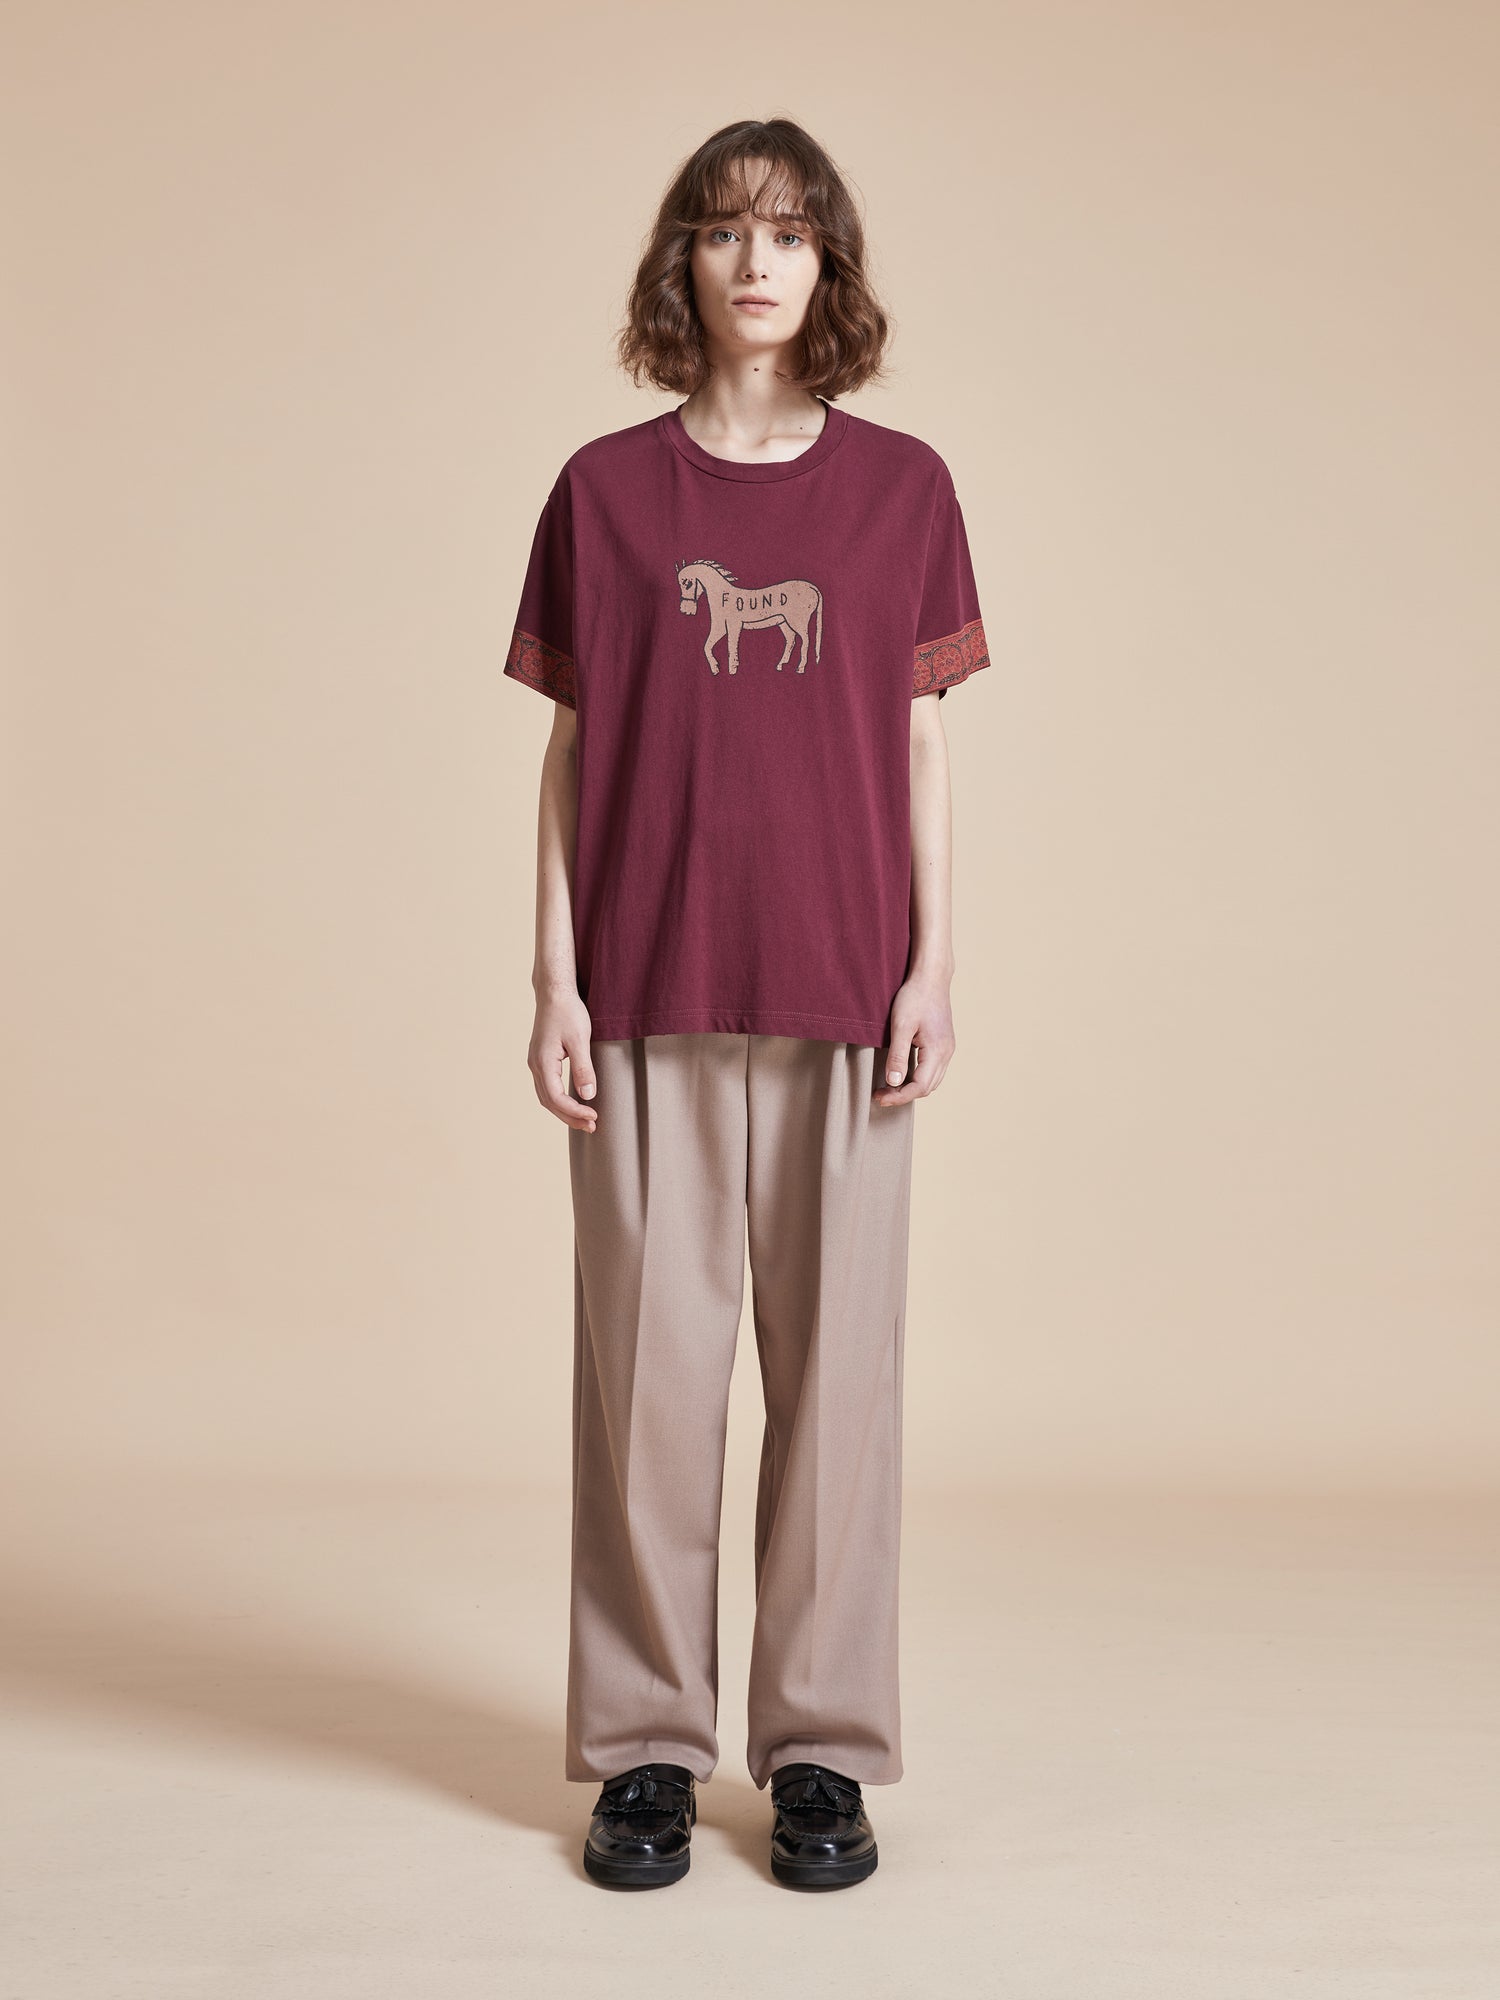 A woman wearing a Found Horse Embellishment Tee burgundy t-shirt and beige pants with floral motifs.